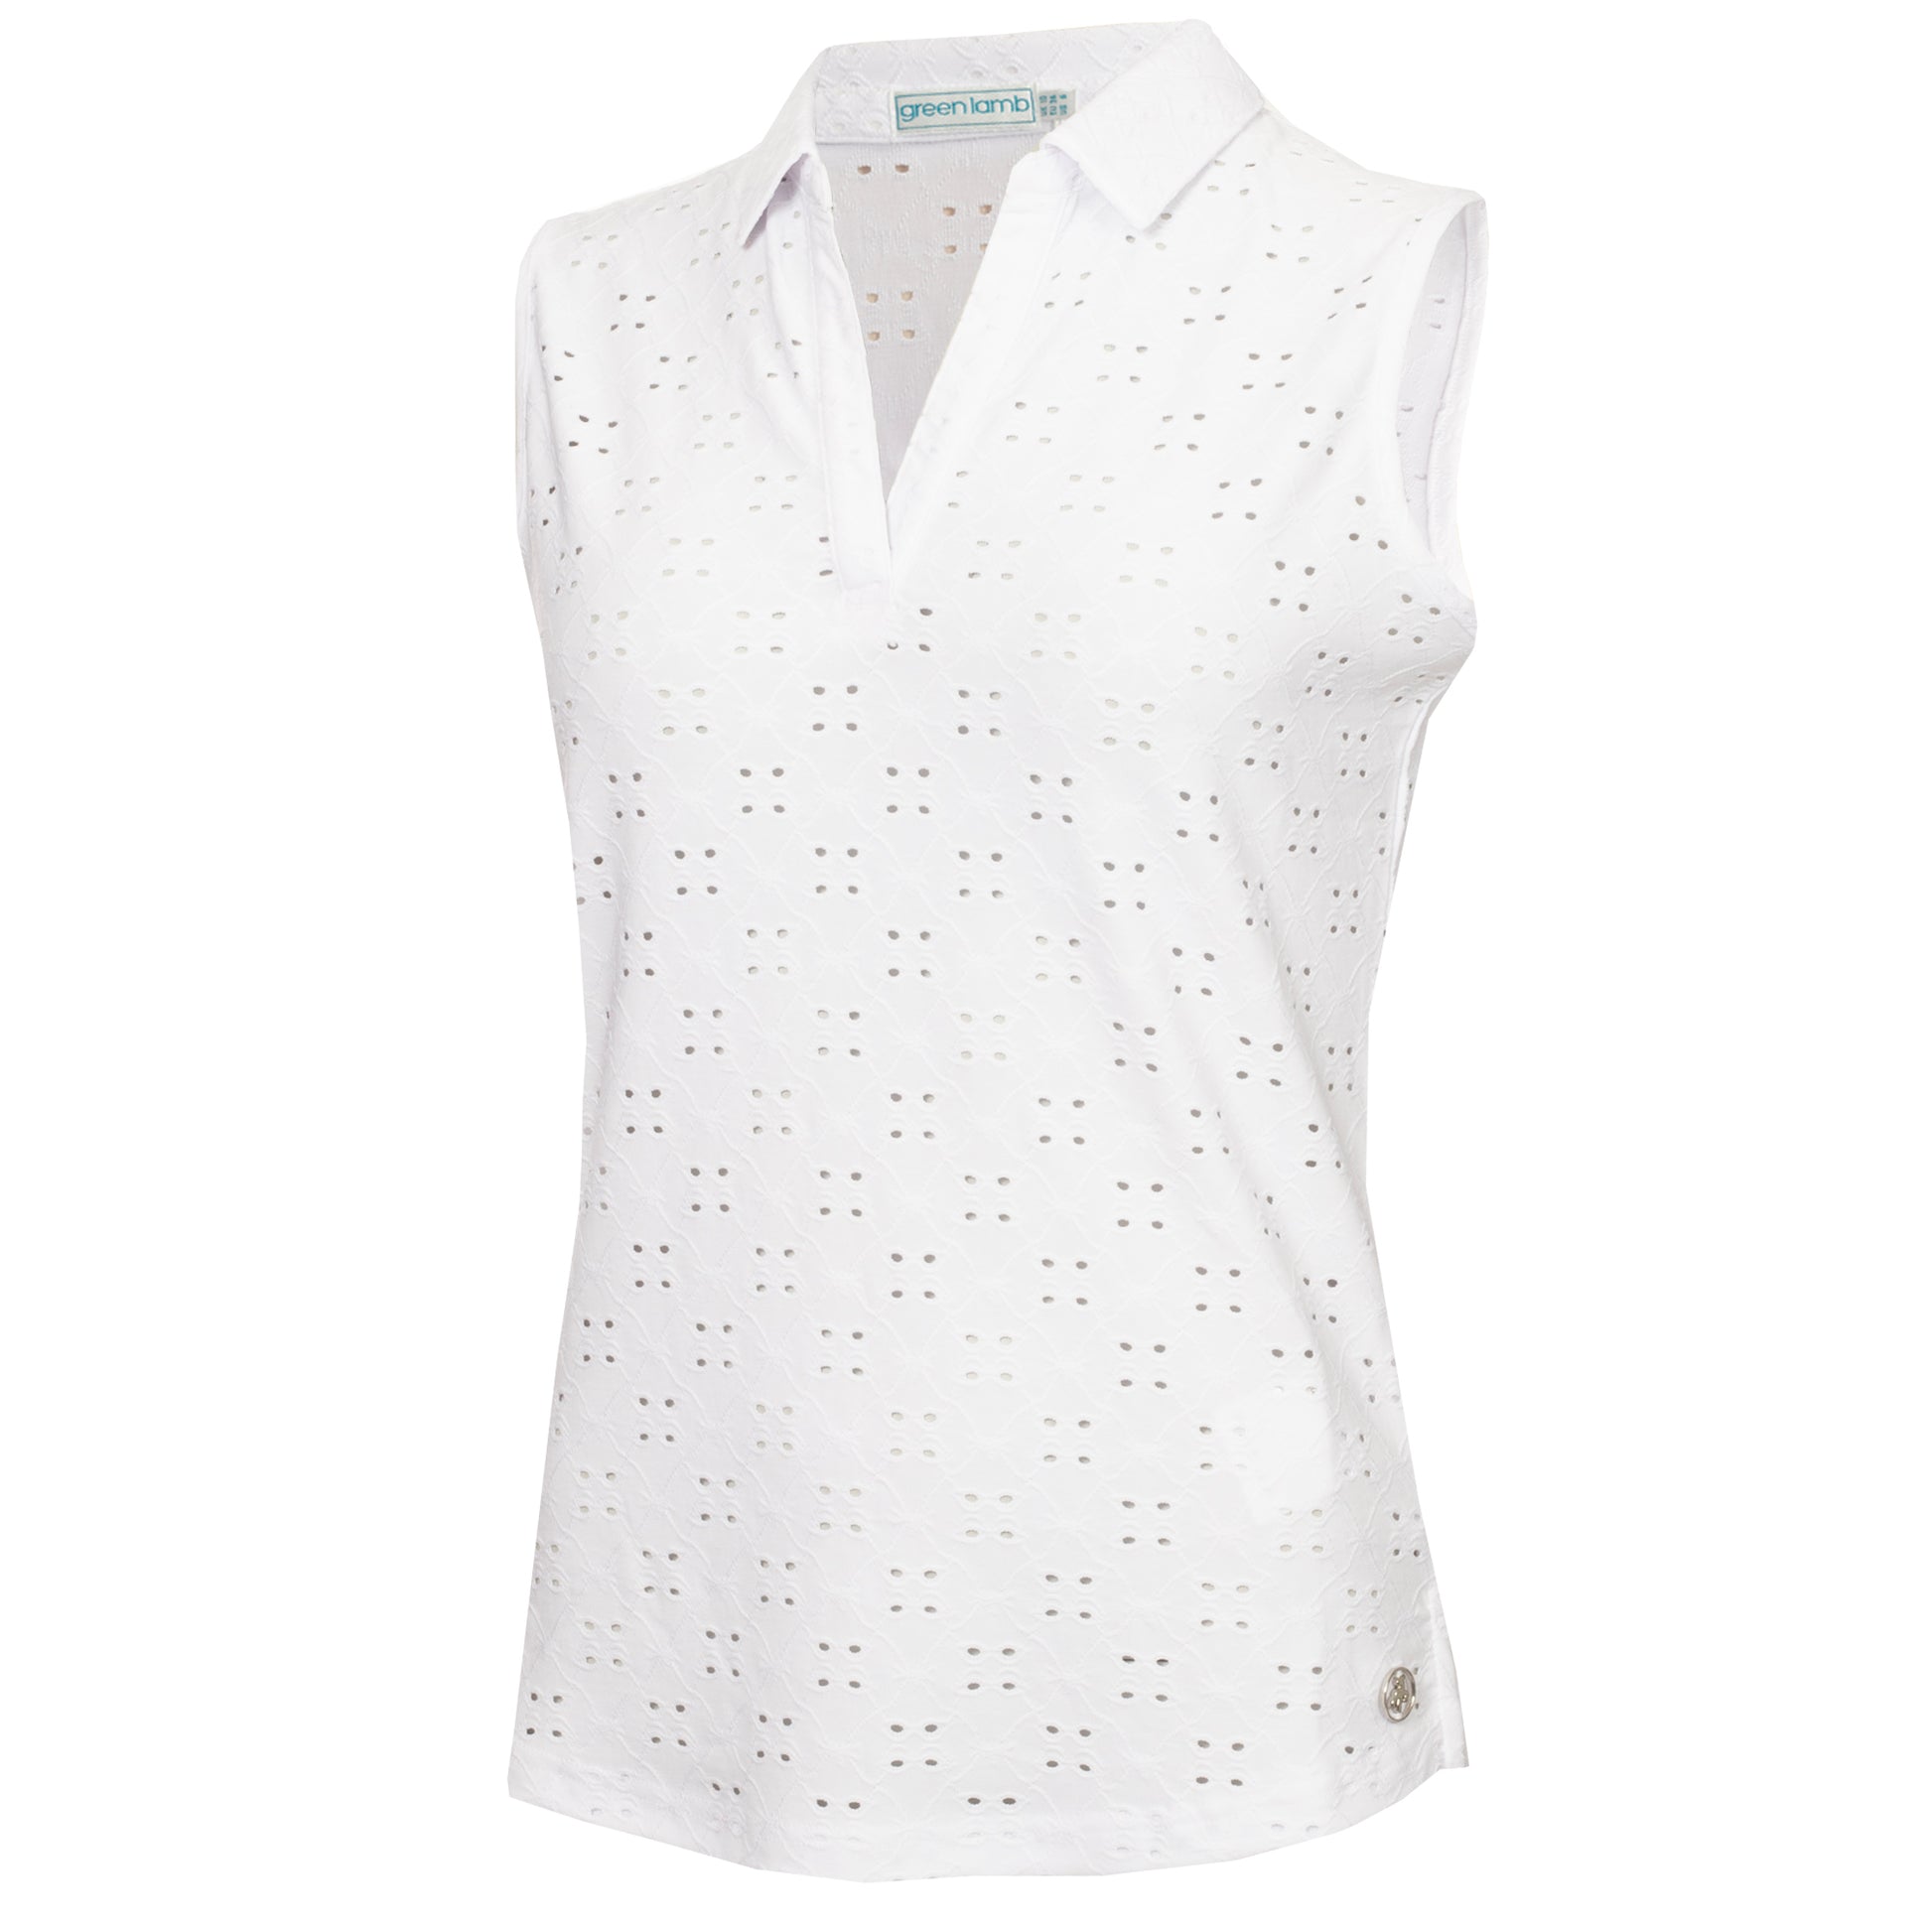 Green Lamb Ladies Sleeveless Polo with Broderie Anglaise Pattern in White